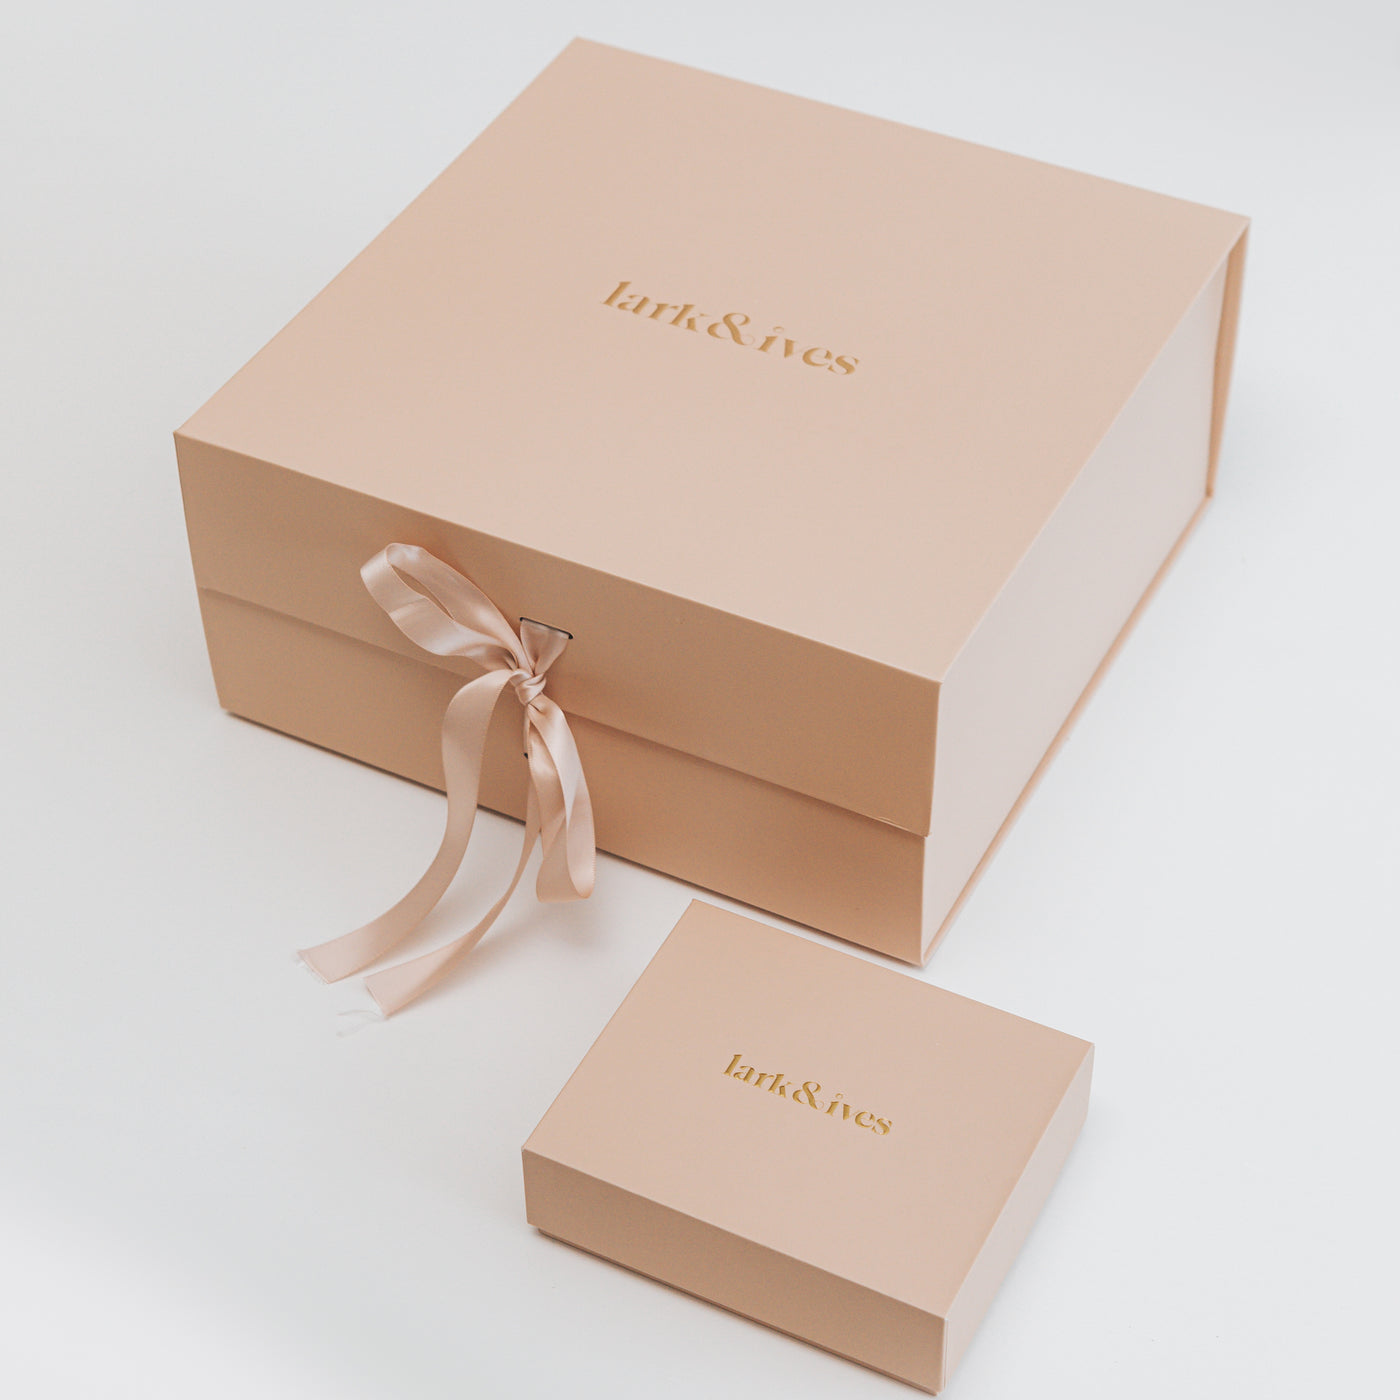 Lark and Ives / Gift Box / Gift Ideas / Gift Guide / Gift Wrapping / Gift Wrap / Bridesmaid Gift / Nude Pink / Gold Embossing / Gold Lettering / Large Gift Box and Small Gift Box